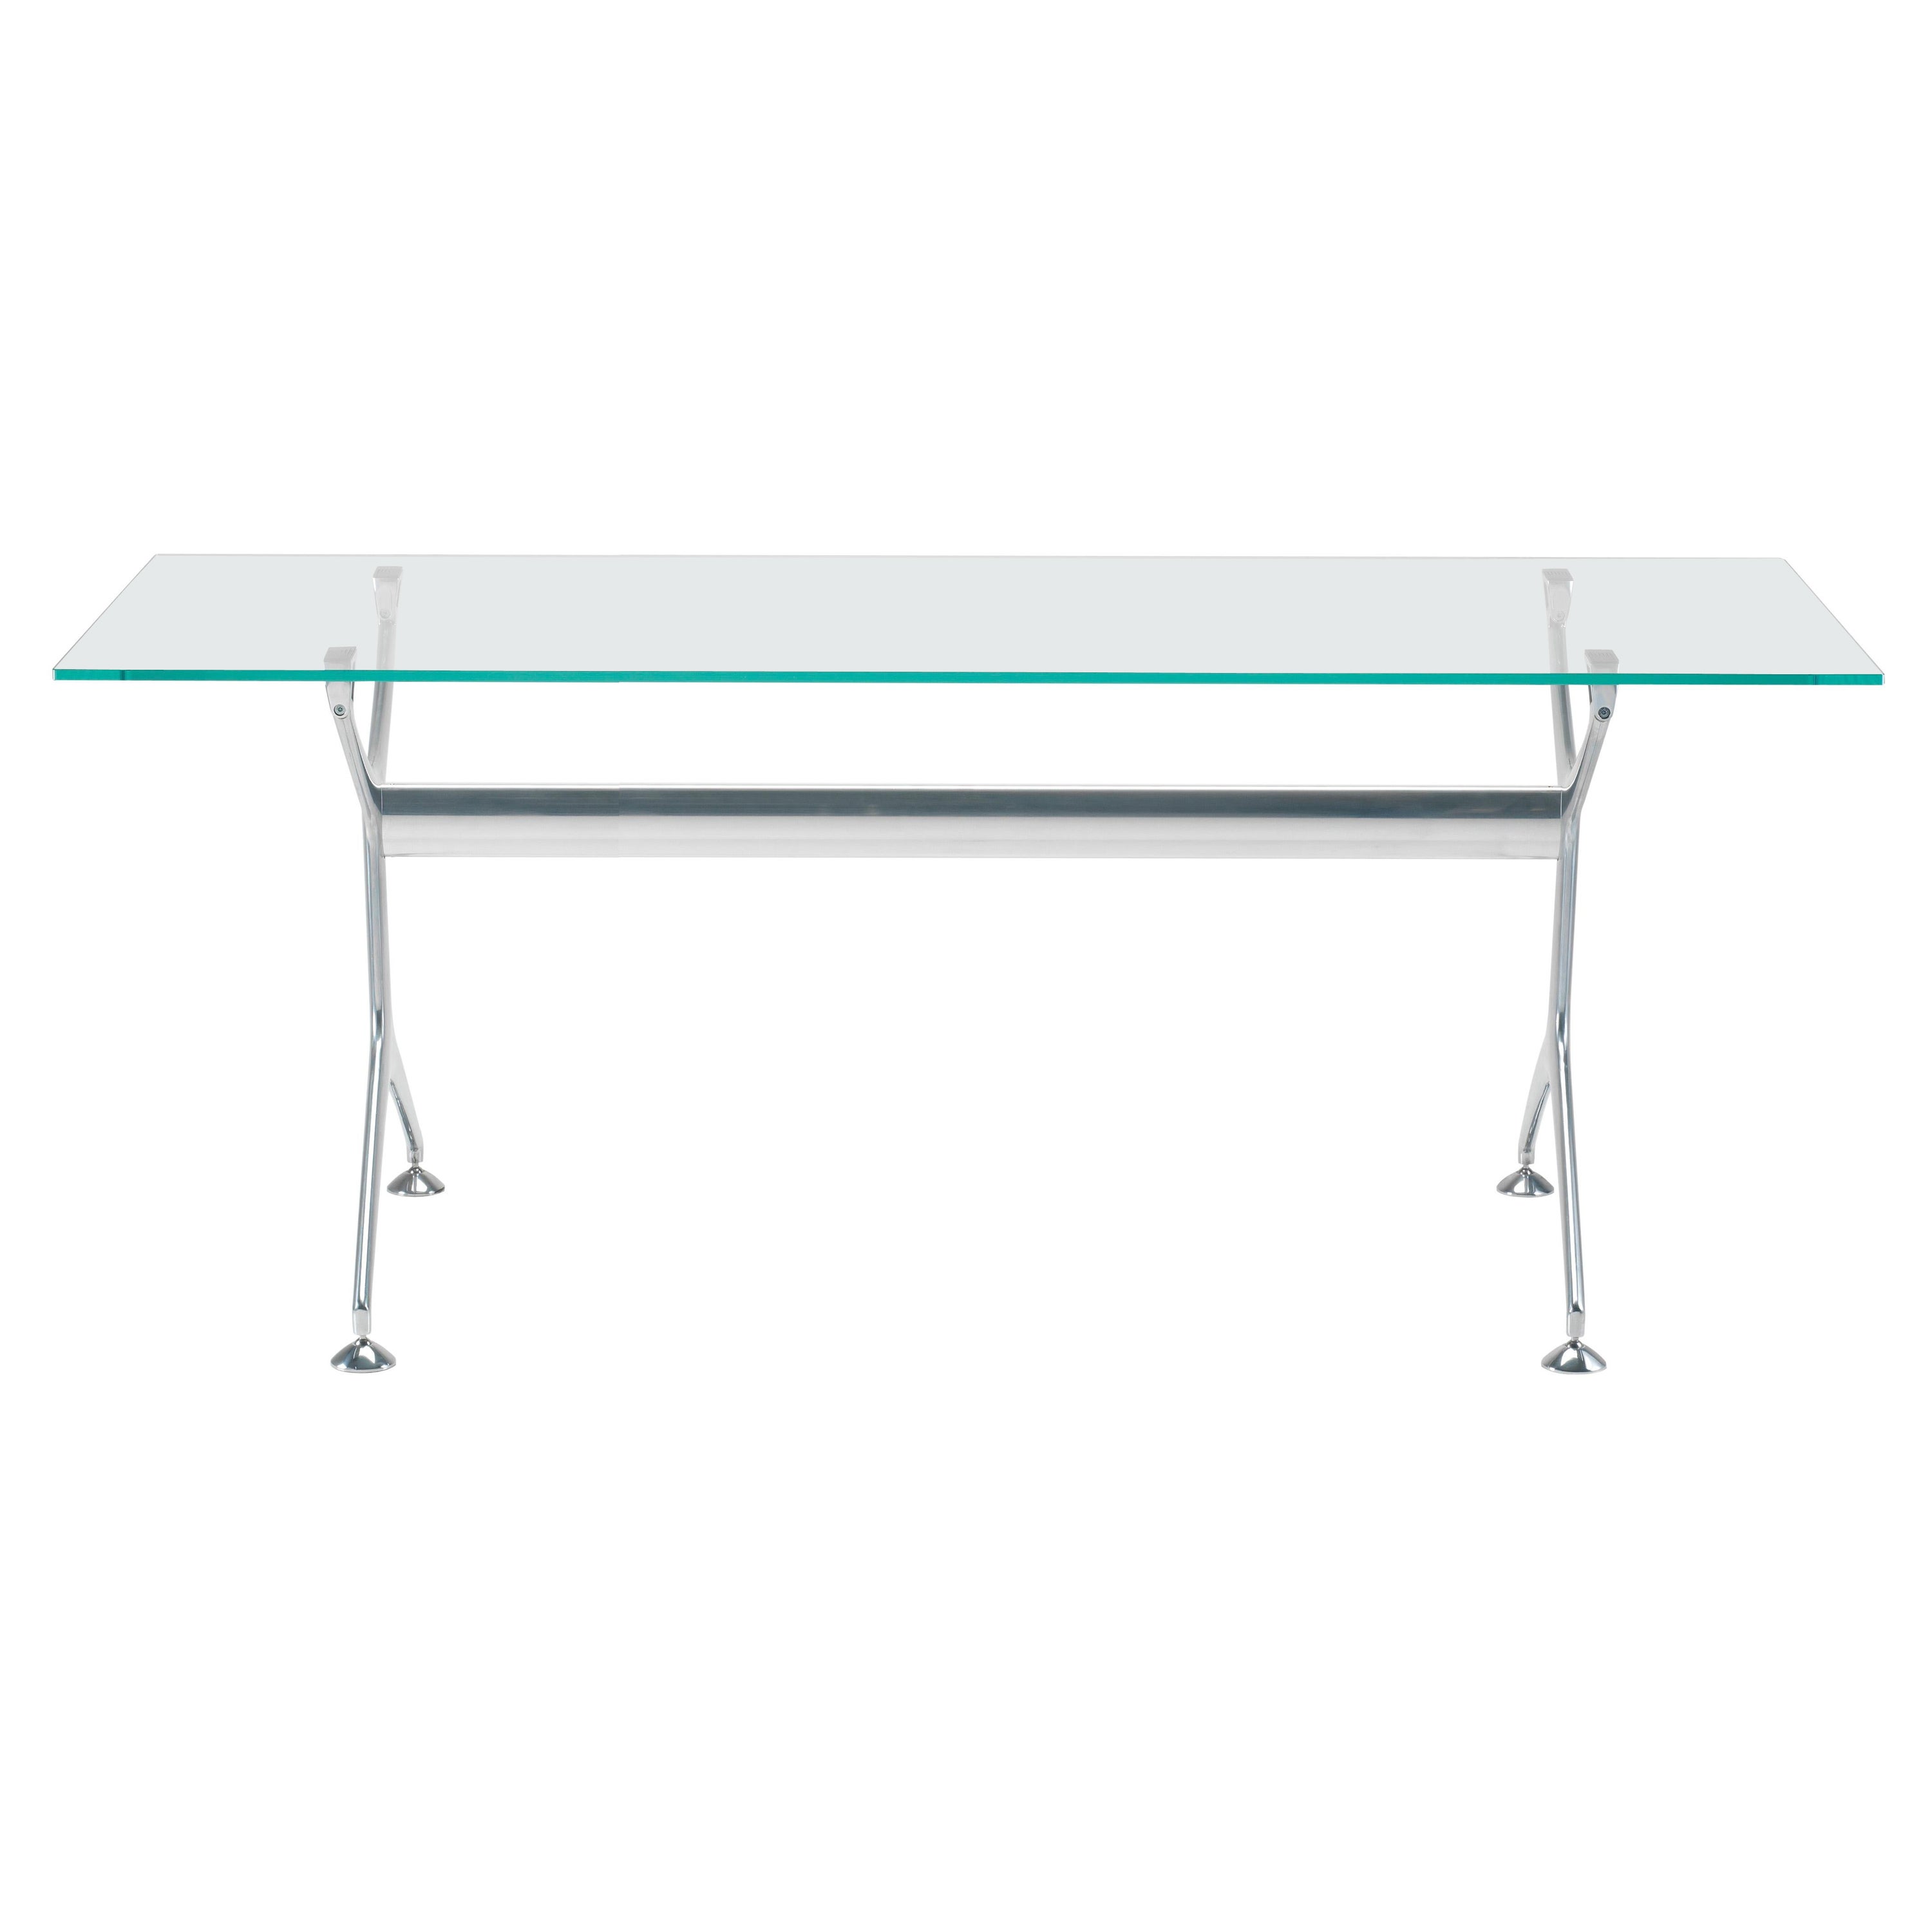 Alias Frametable 160 in Glass Top with Polished Aluminium Frame by Alberto Meda For Sale